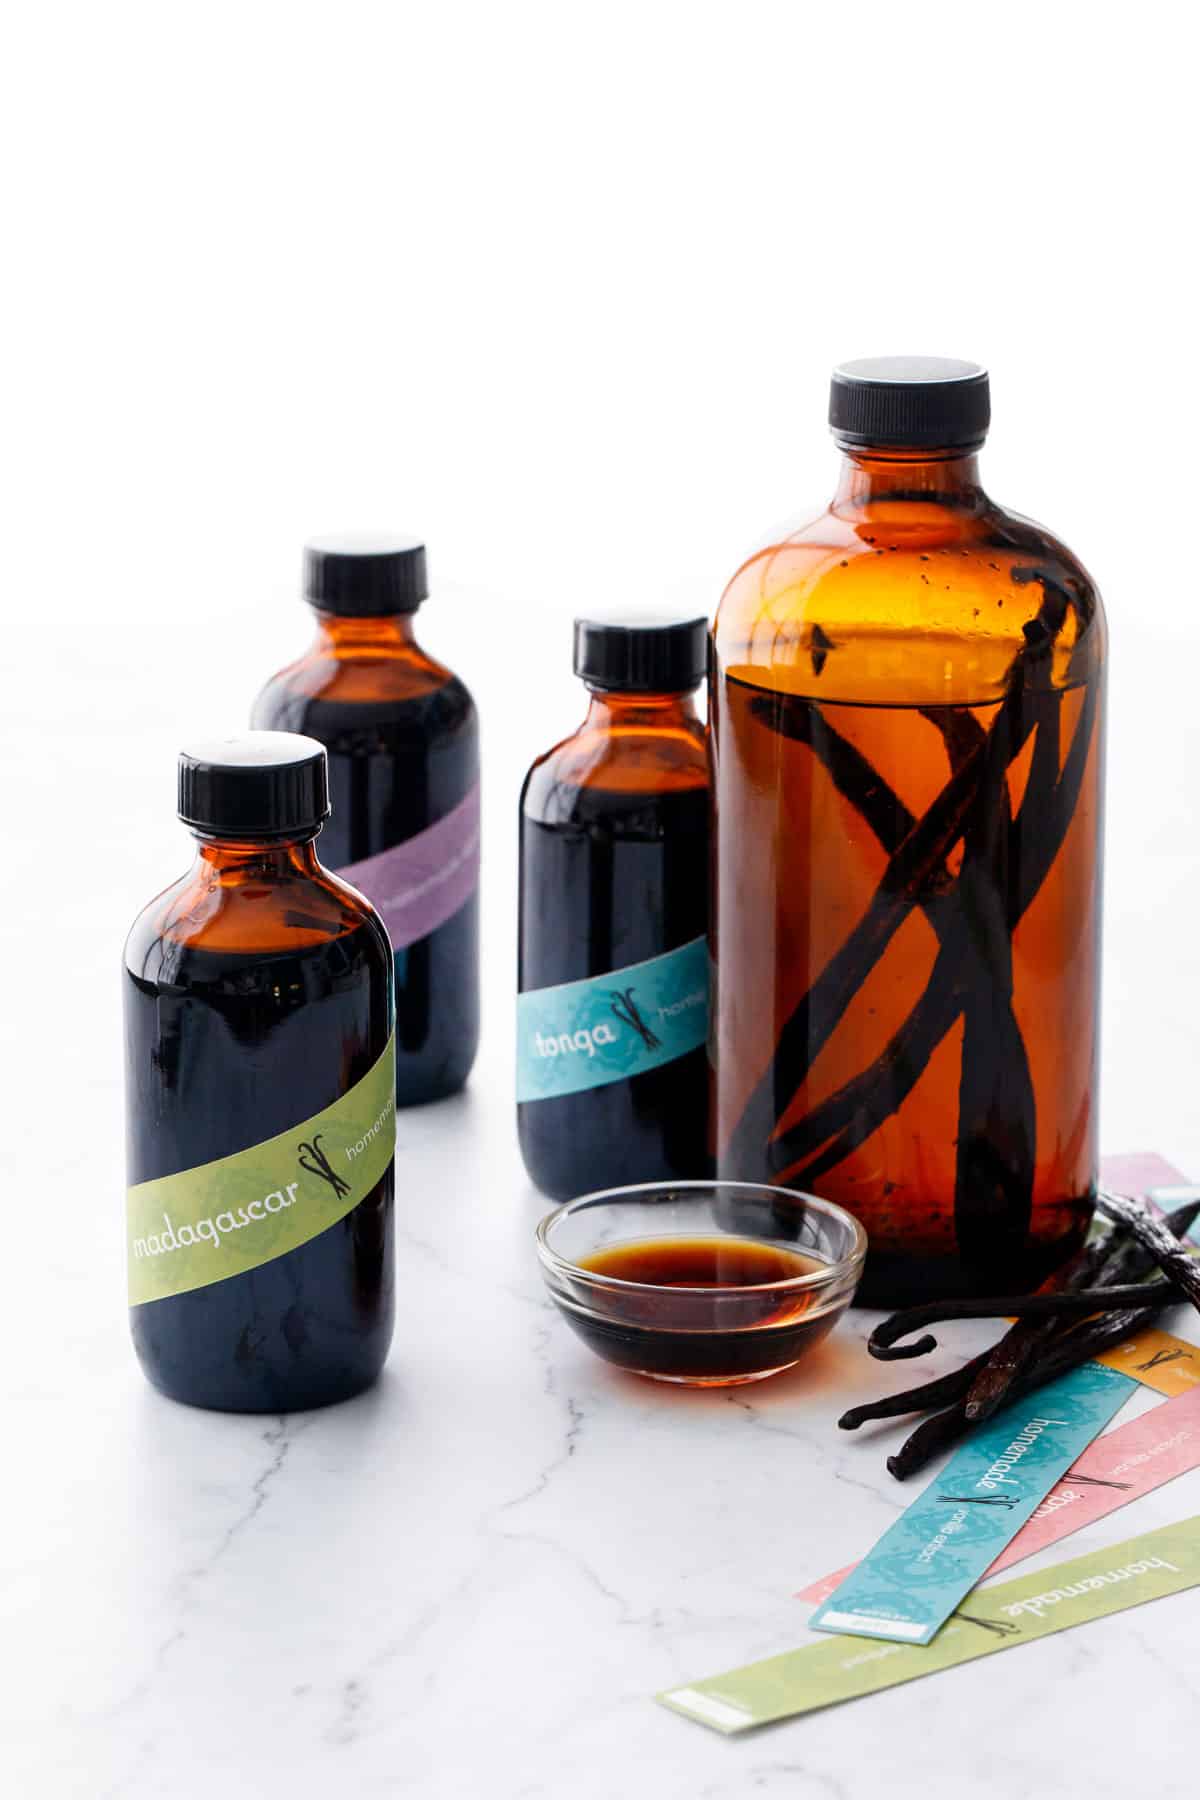 Bottles of freshly made Homemade Vanilla Extract with colorful labels, and a bottle of alcohol backlit so you can see the beans inside, plus a small bowl of extract and a few beans on the side.